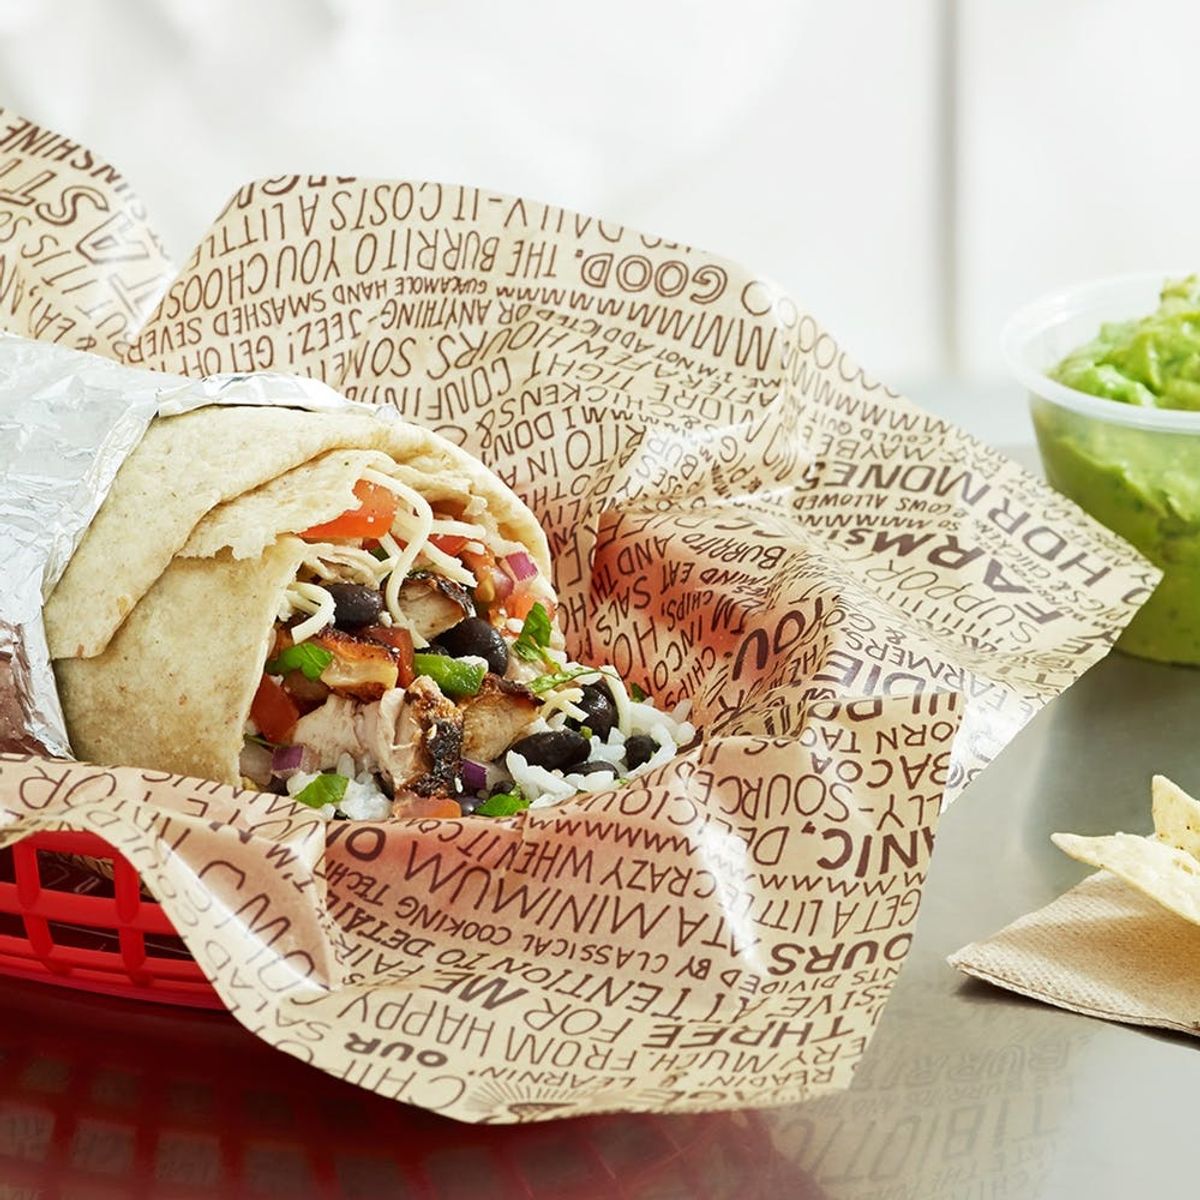 Burrito Lovers, Chipotle Has REALLY Good News for You